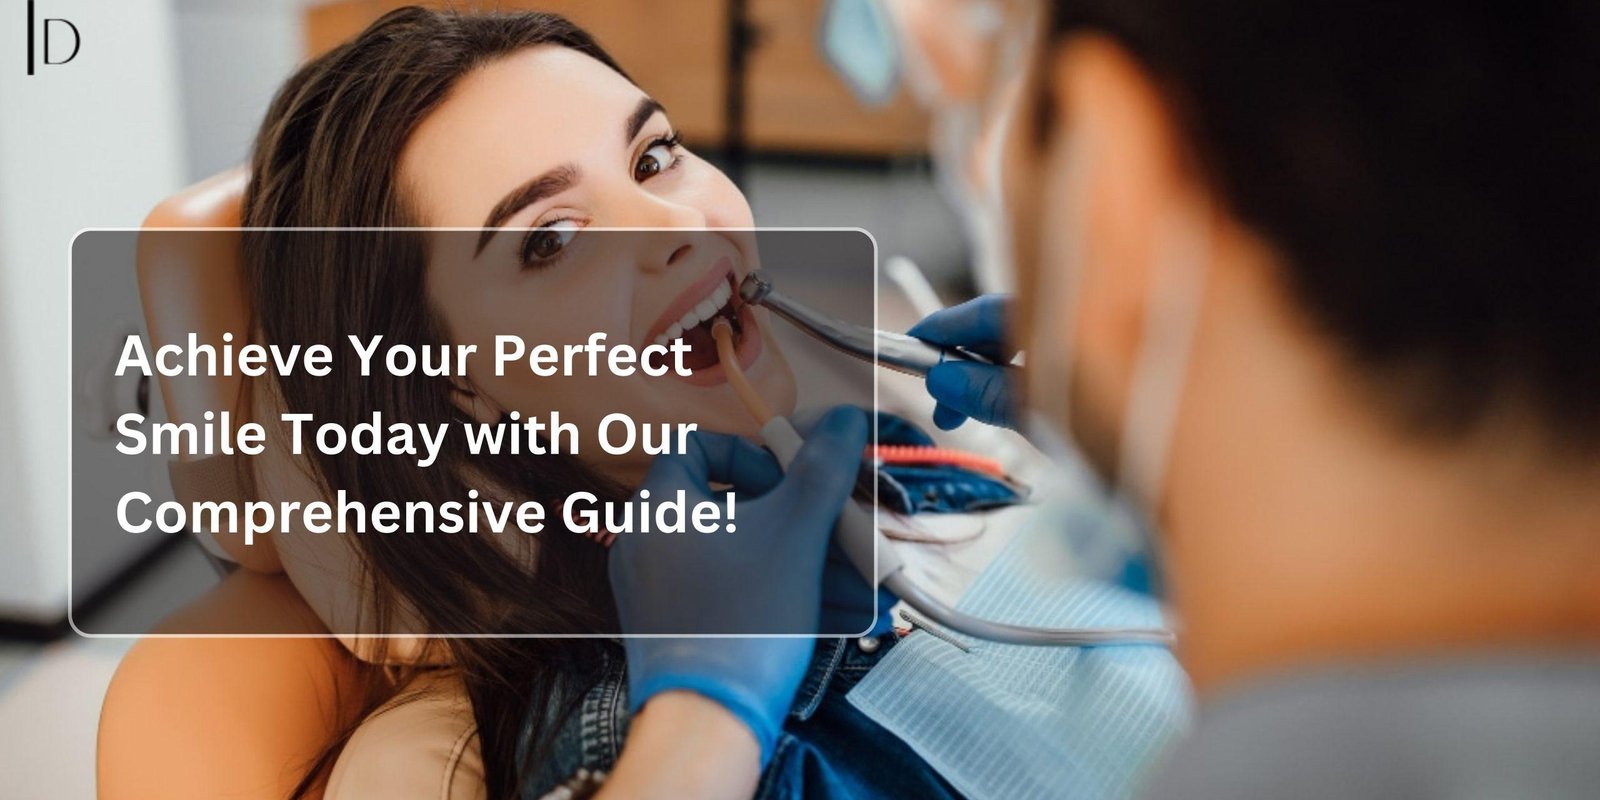 Achieving the Perfect Smile: The Implant Dentists’s Comprehensive Guide